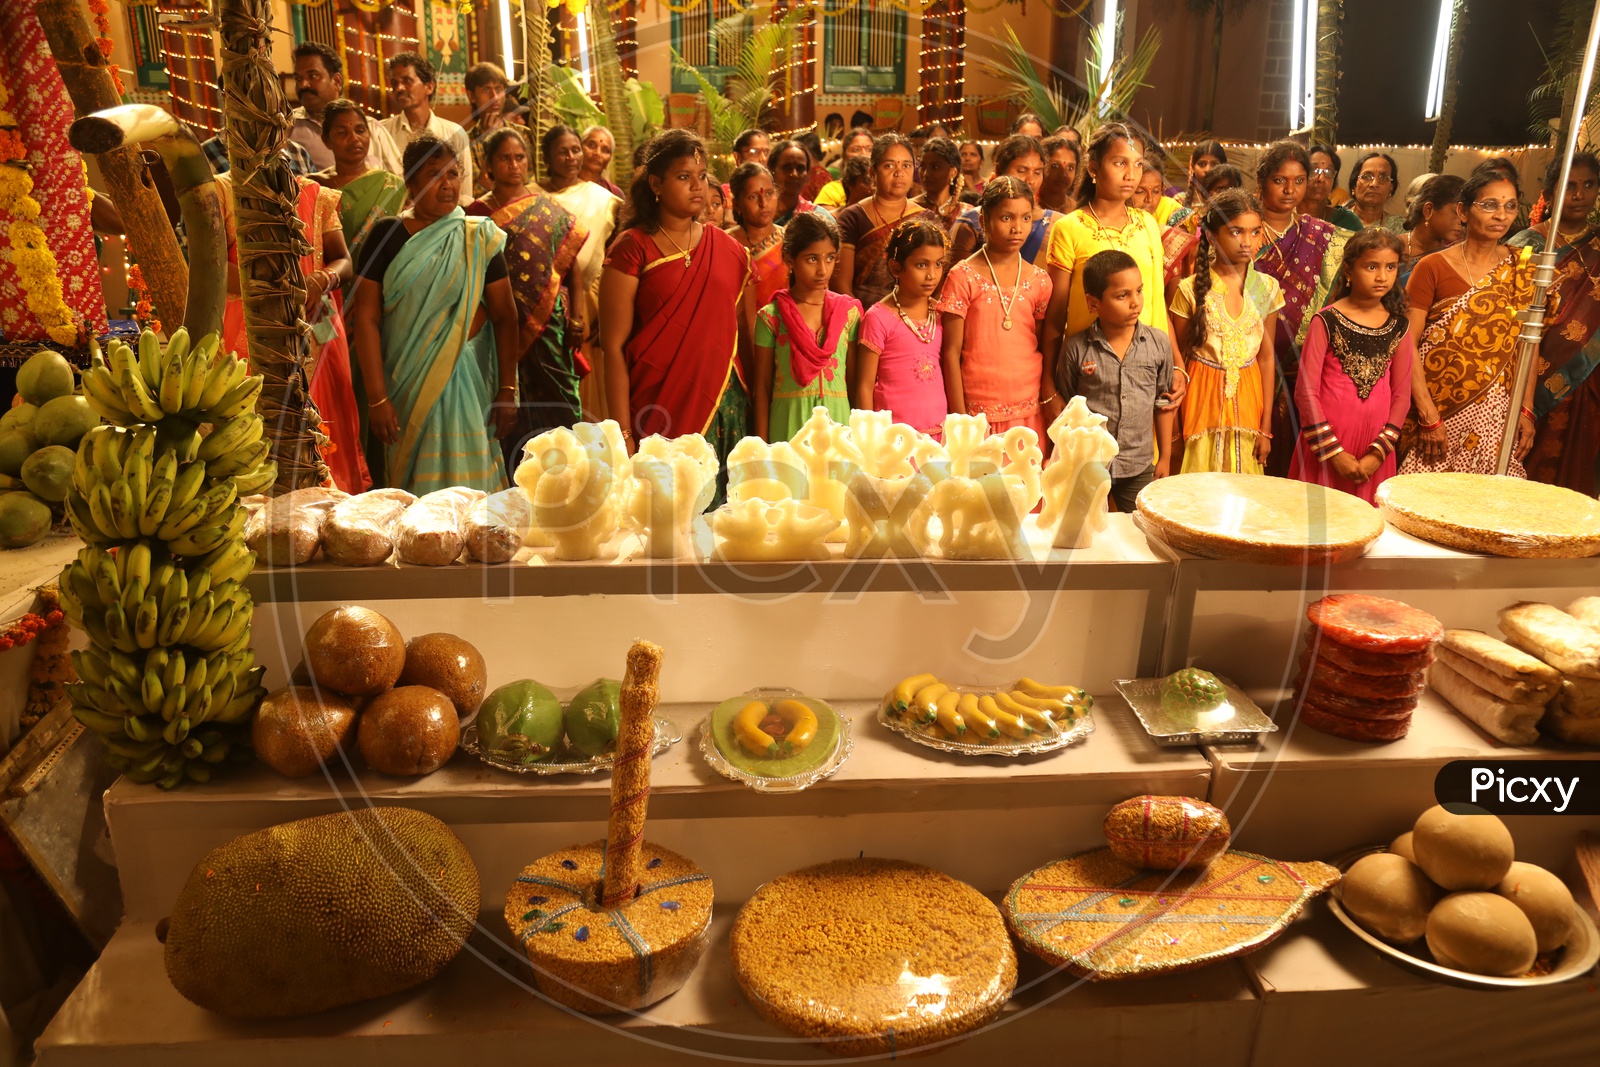 South Indian Sweets Or Savouries in Weddings